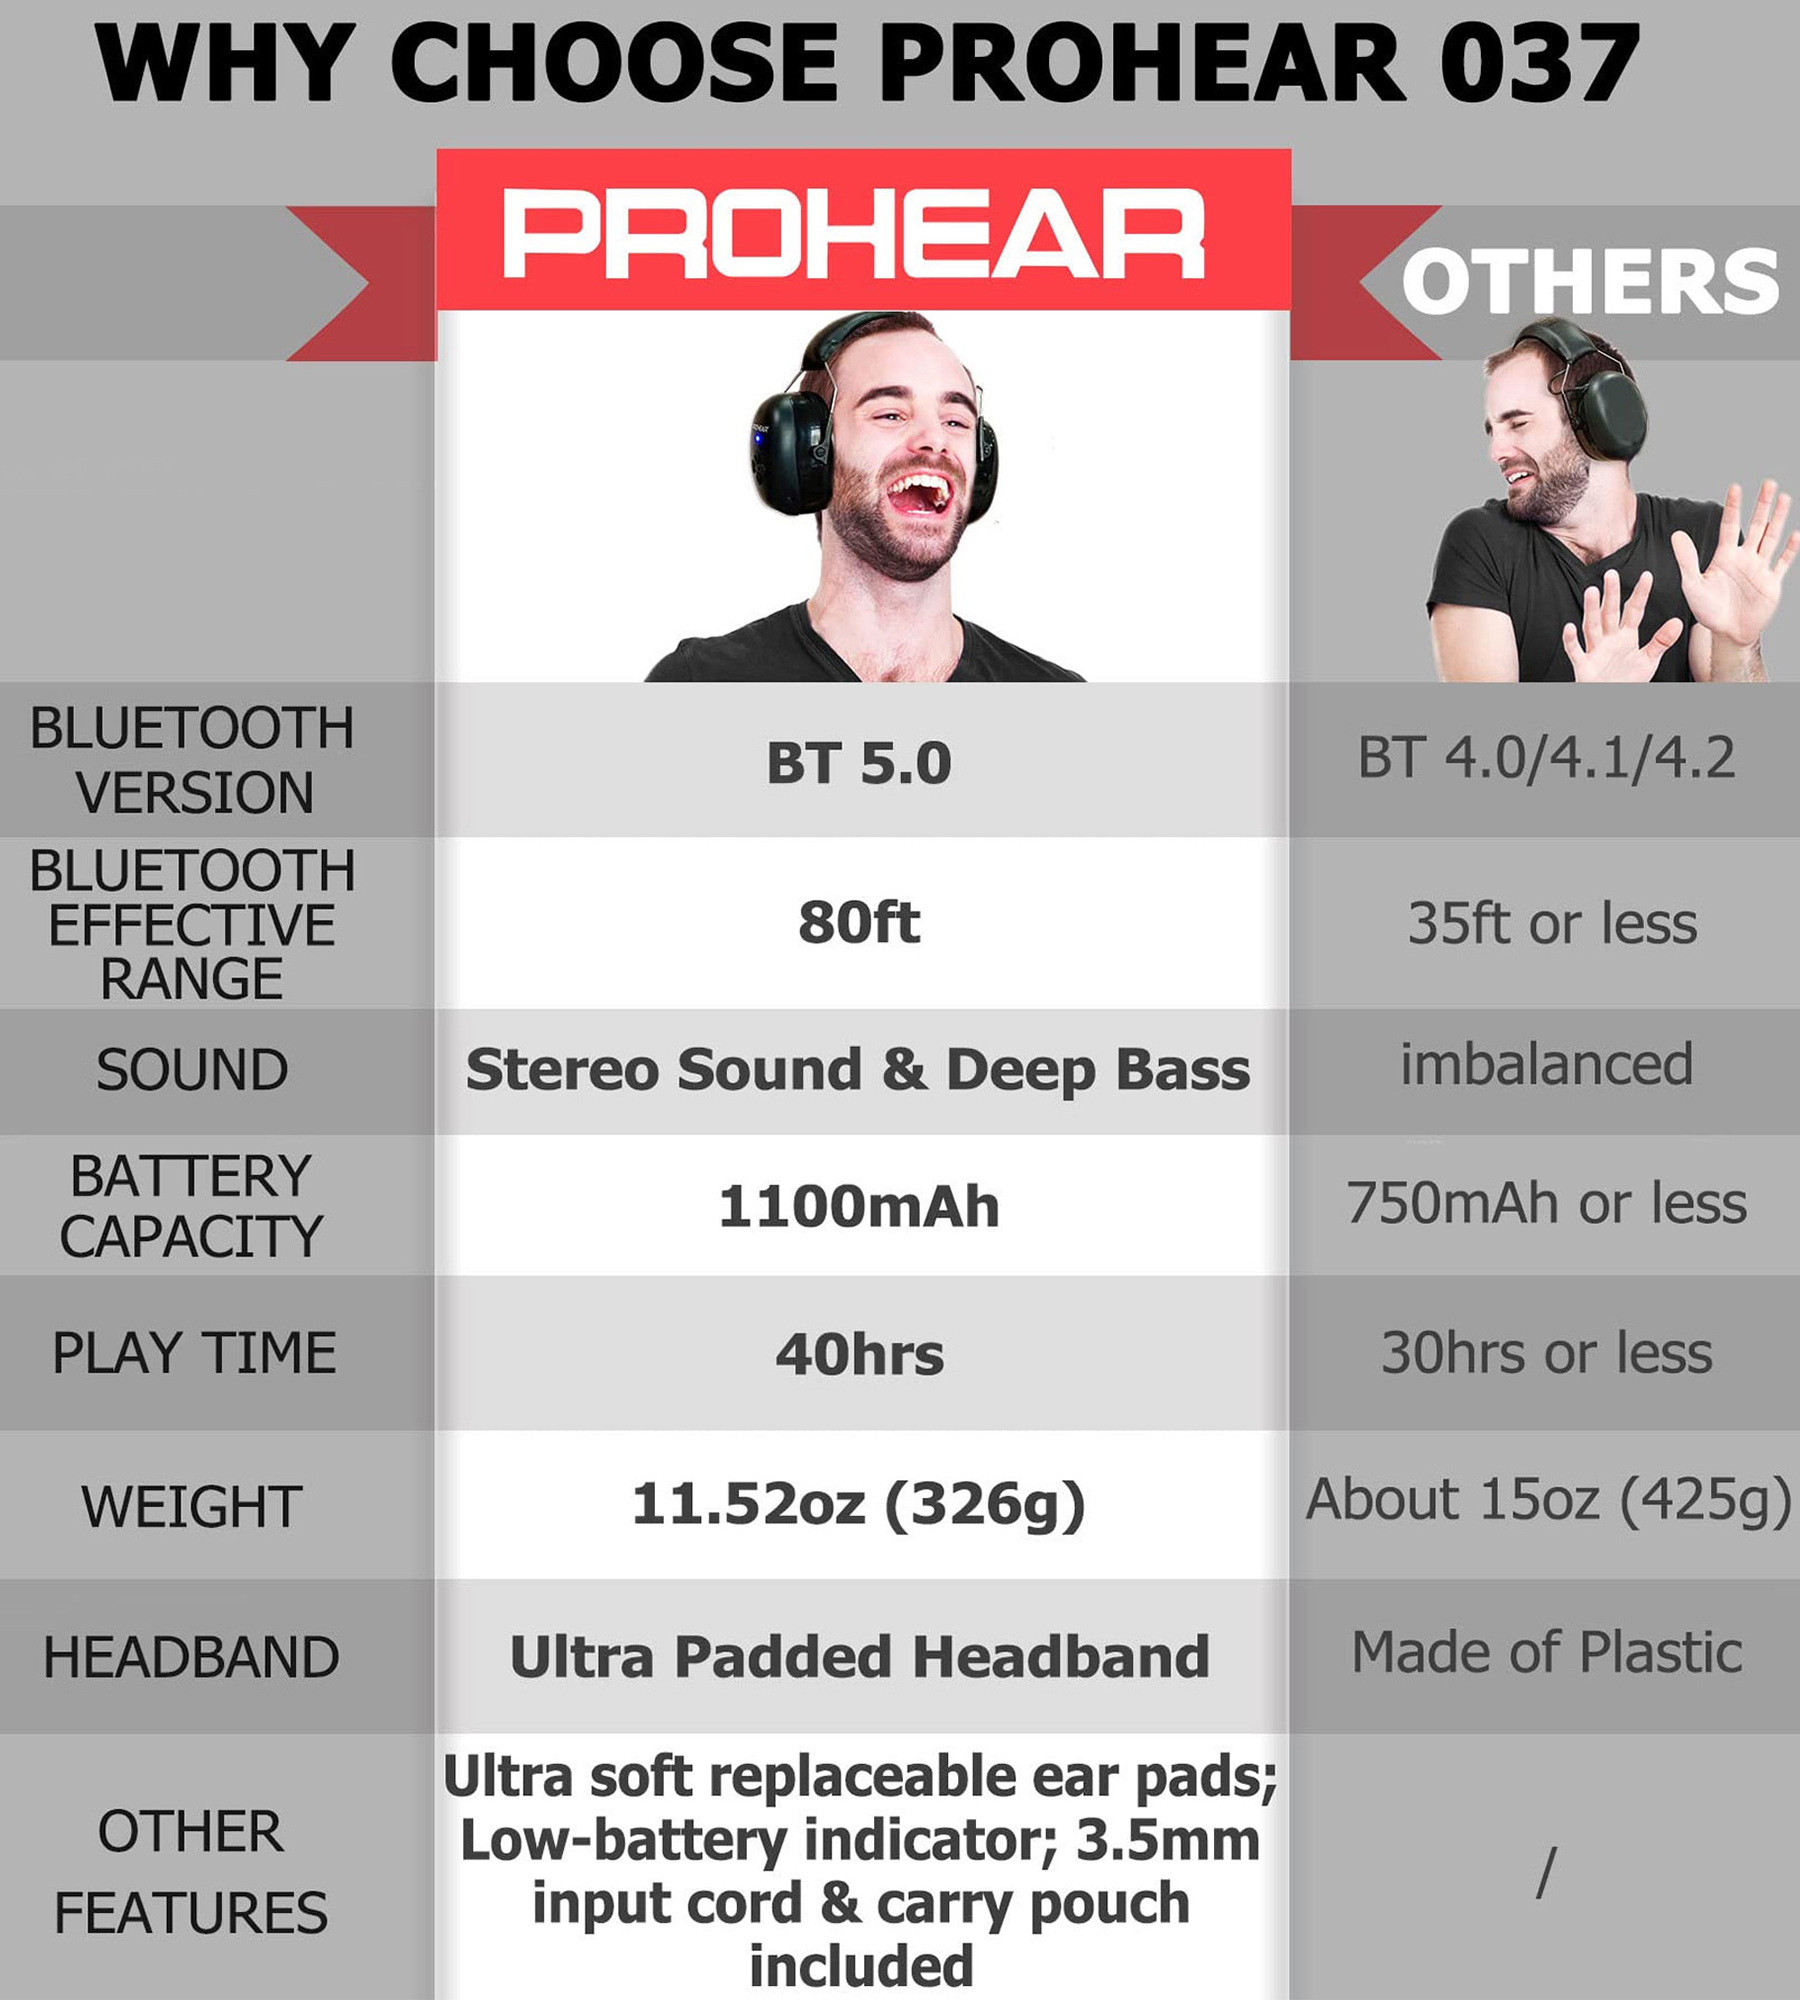 PROHEAR 037 Hearing Protection with Bluetooth 5.0 Technology, NRR 25dB  Safety Earmuffs with Rechargeable 1100mAh Battery for Mowing Black 